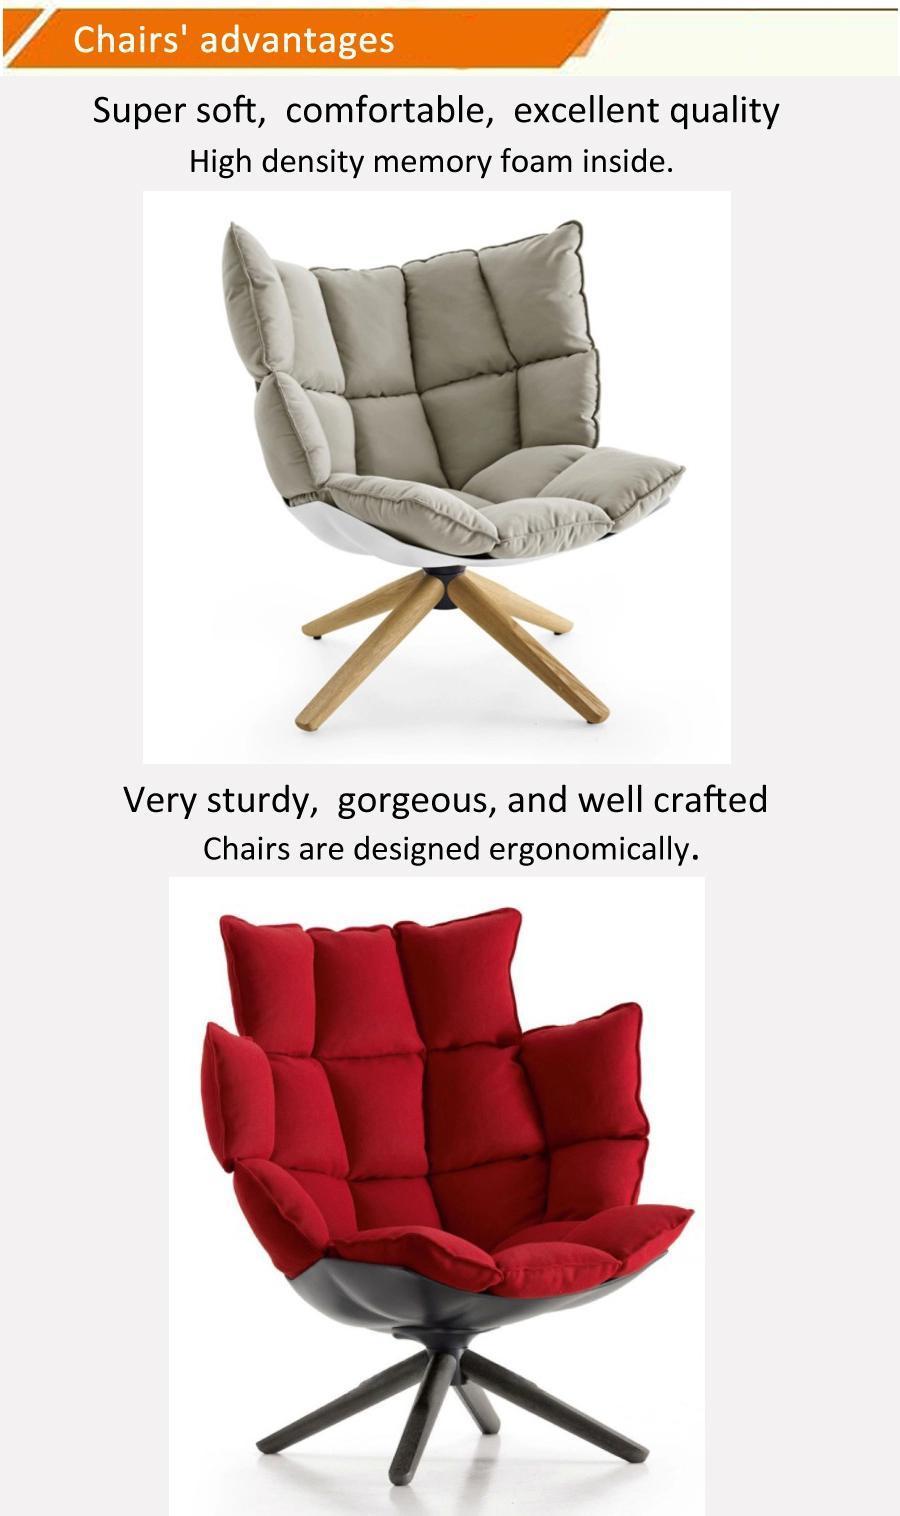 Contemporary Style Fabric Modern Luxury Restaurant Coffee Shop Living Room Dining Chairs